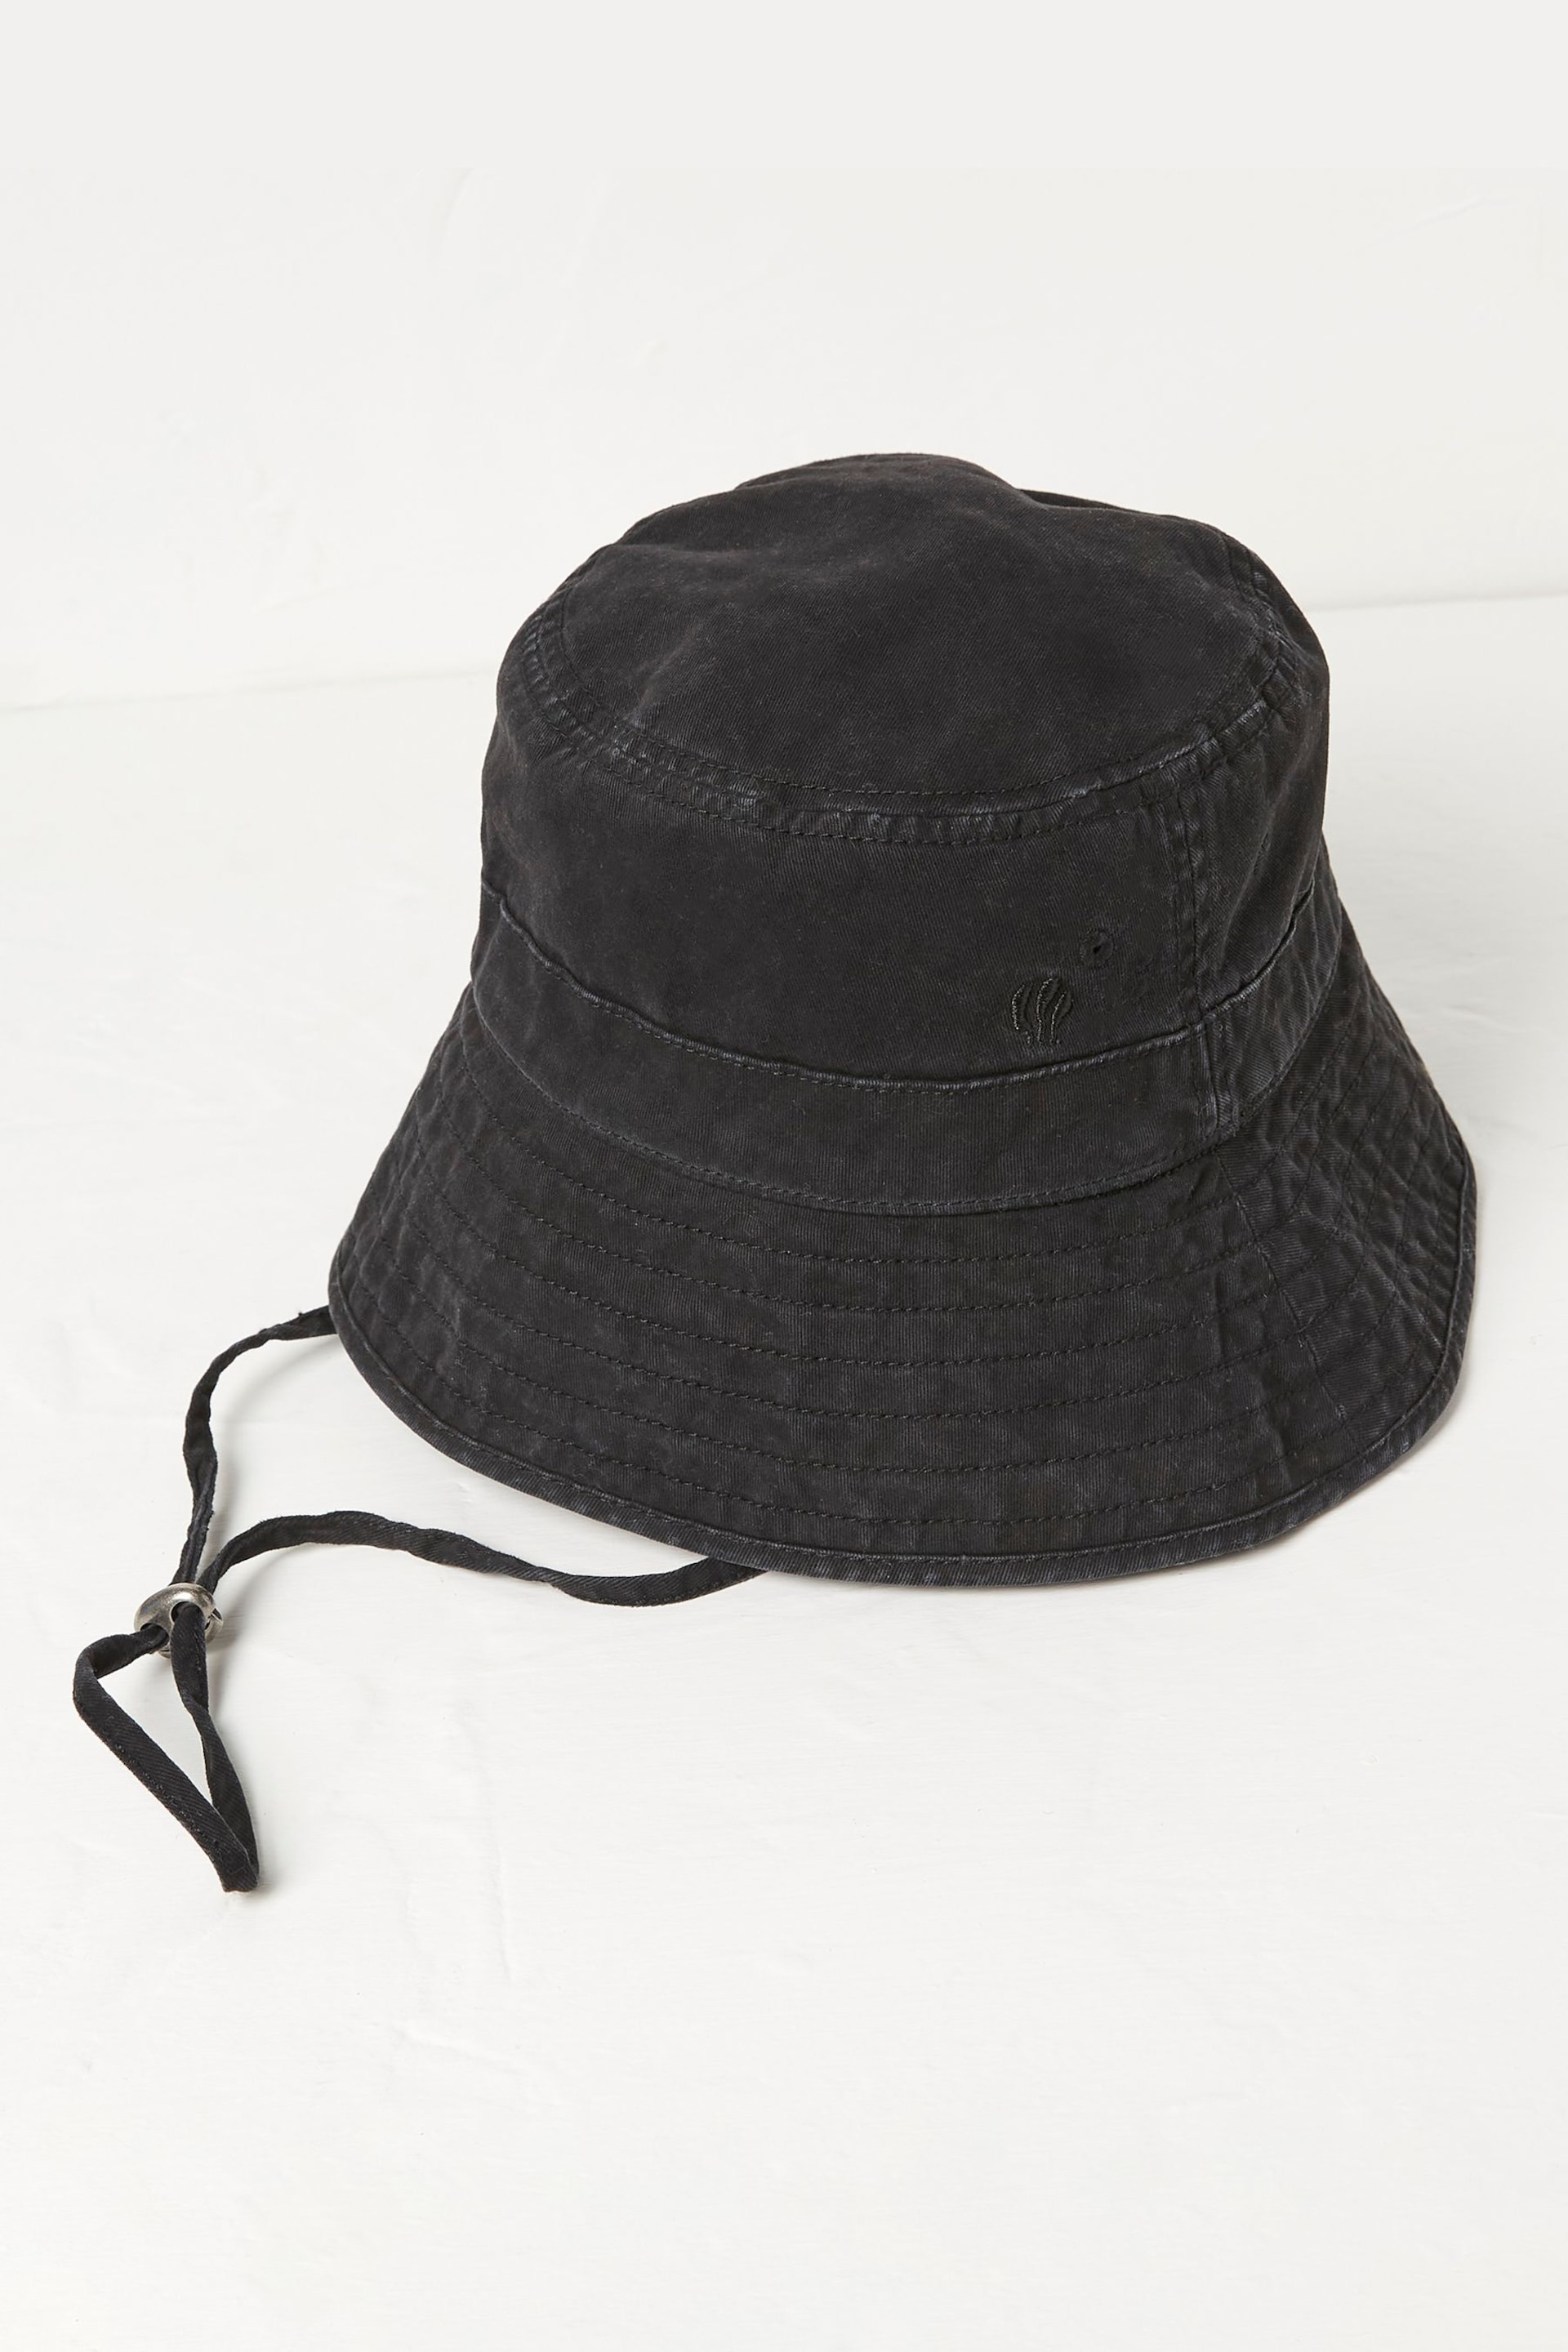 FatFace Black Bucket Hat - Image 1 of 2